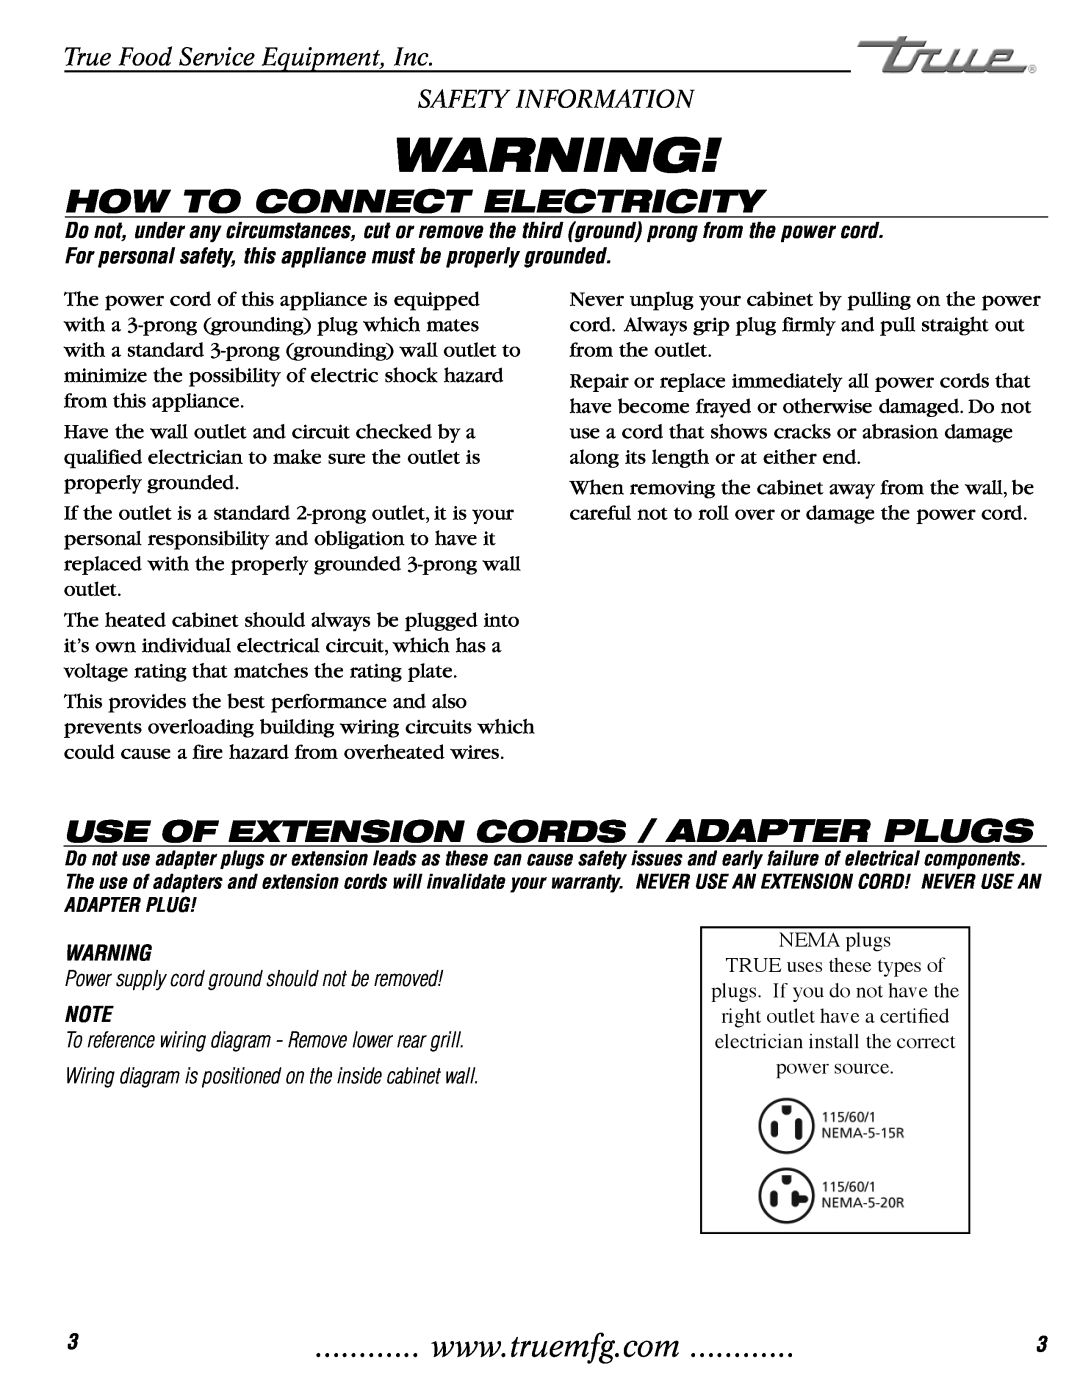 True Manufacturing Company TH-23G installation manual How To Connect Electricity, Use Of Extension Cords / Adapter Plugs 